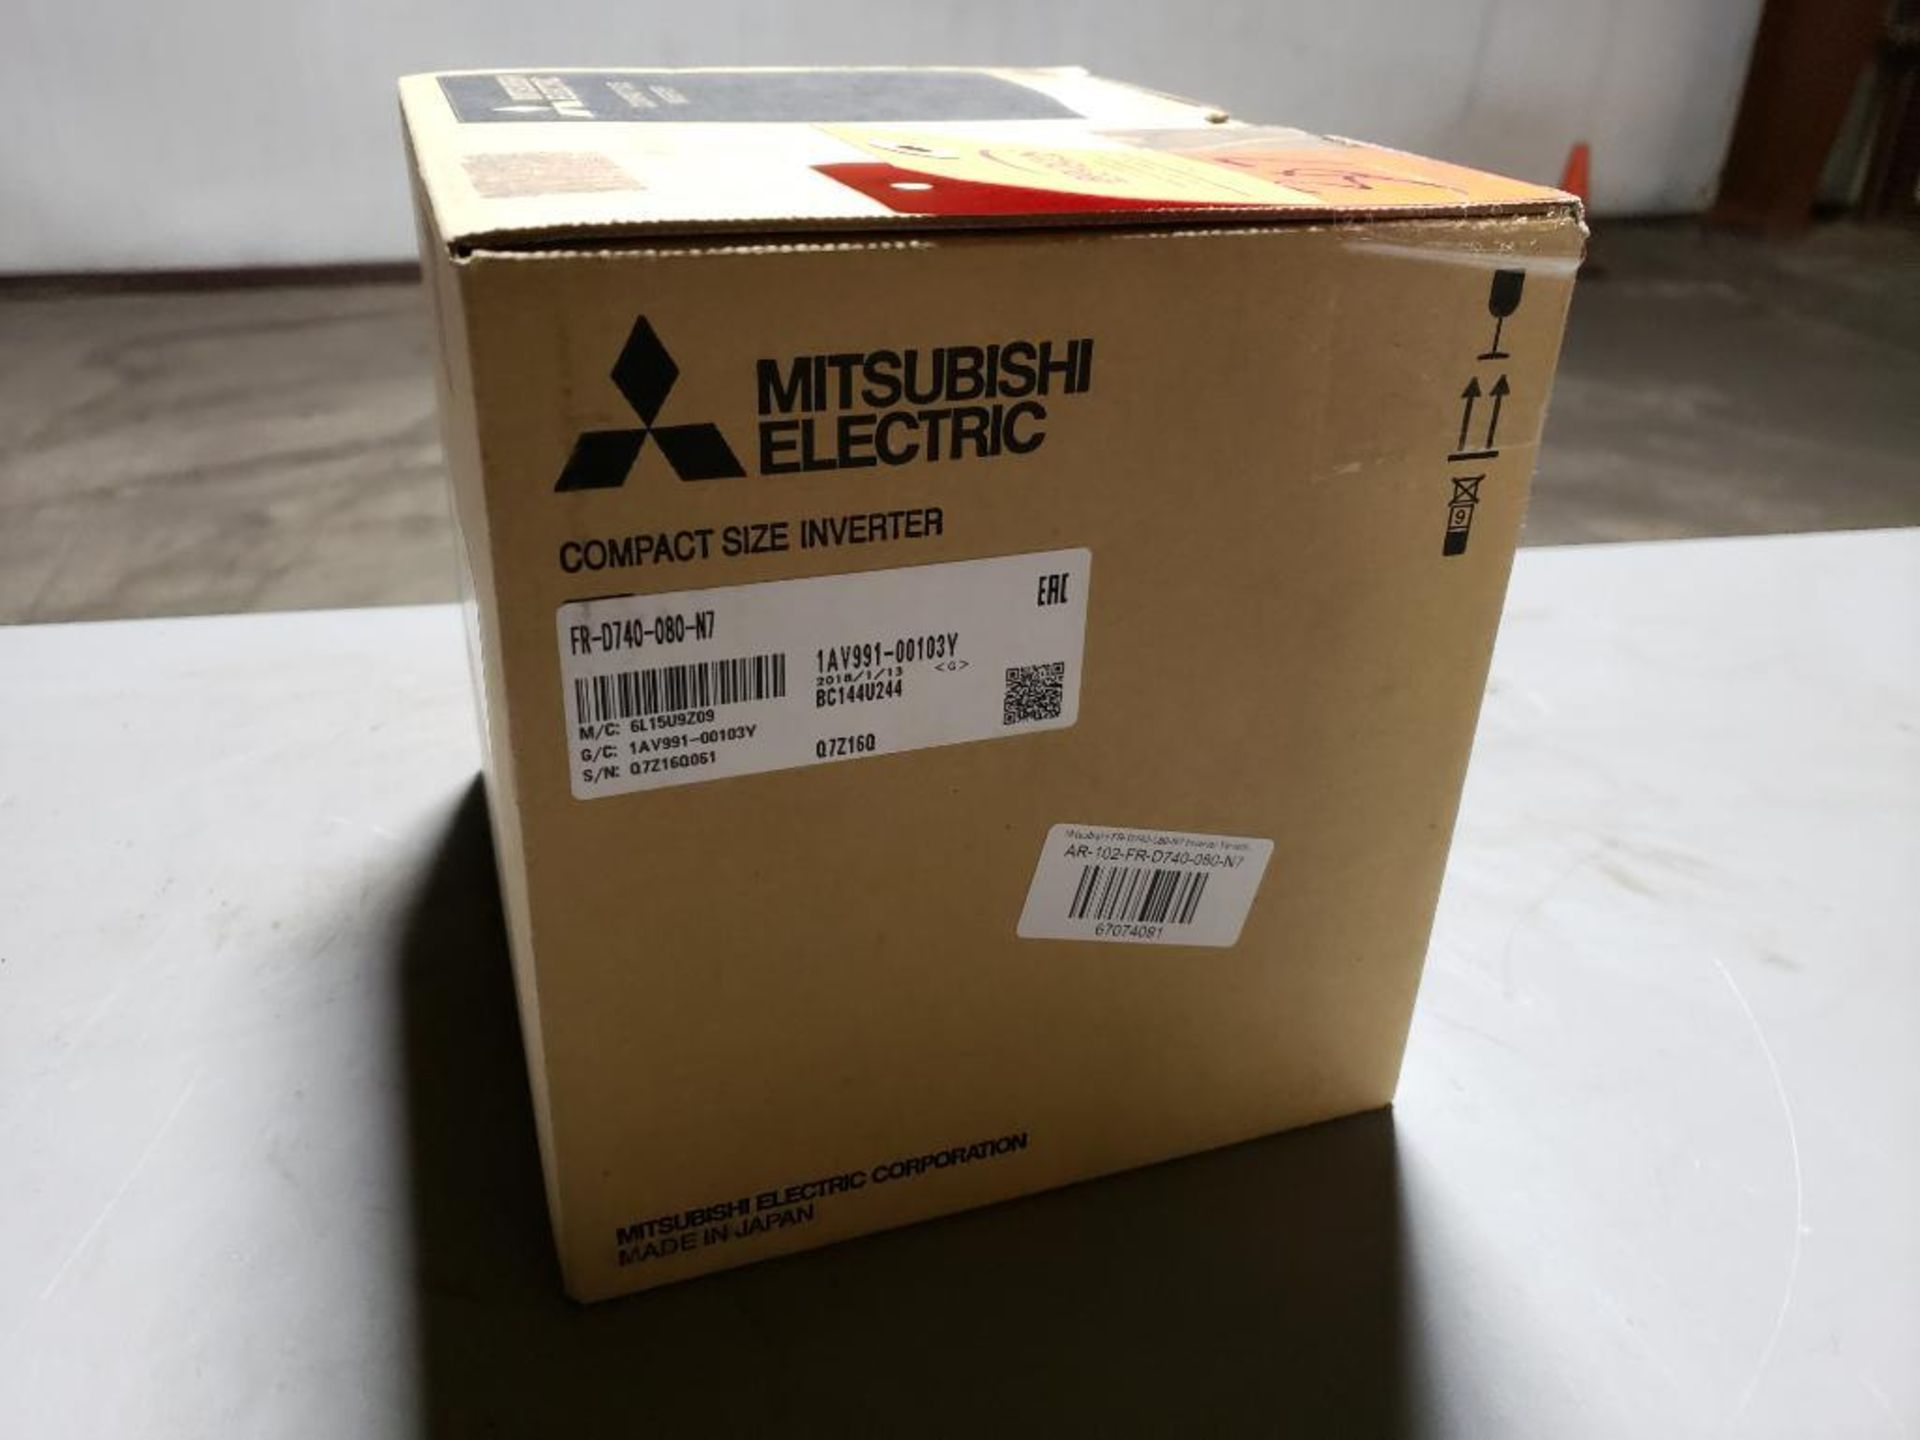 Mitsubishi inverter drive. Part number FR-D740-080-N7. New in box. - Image 5 of 5